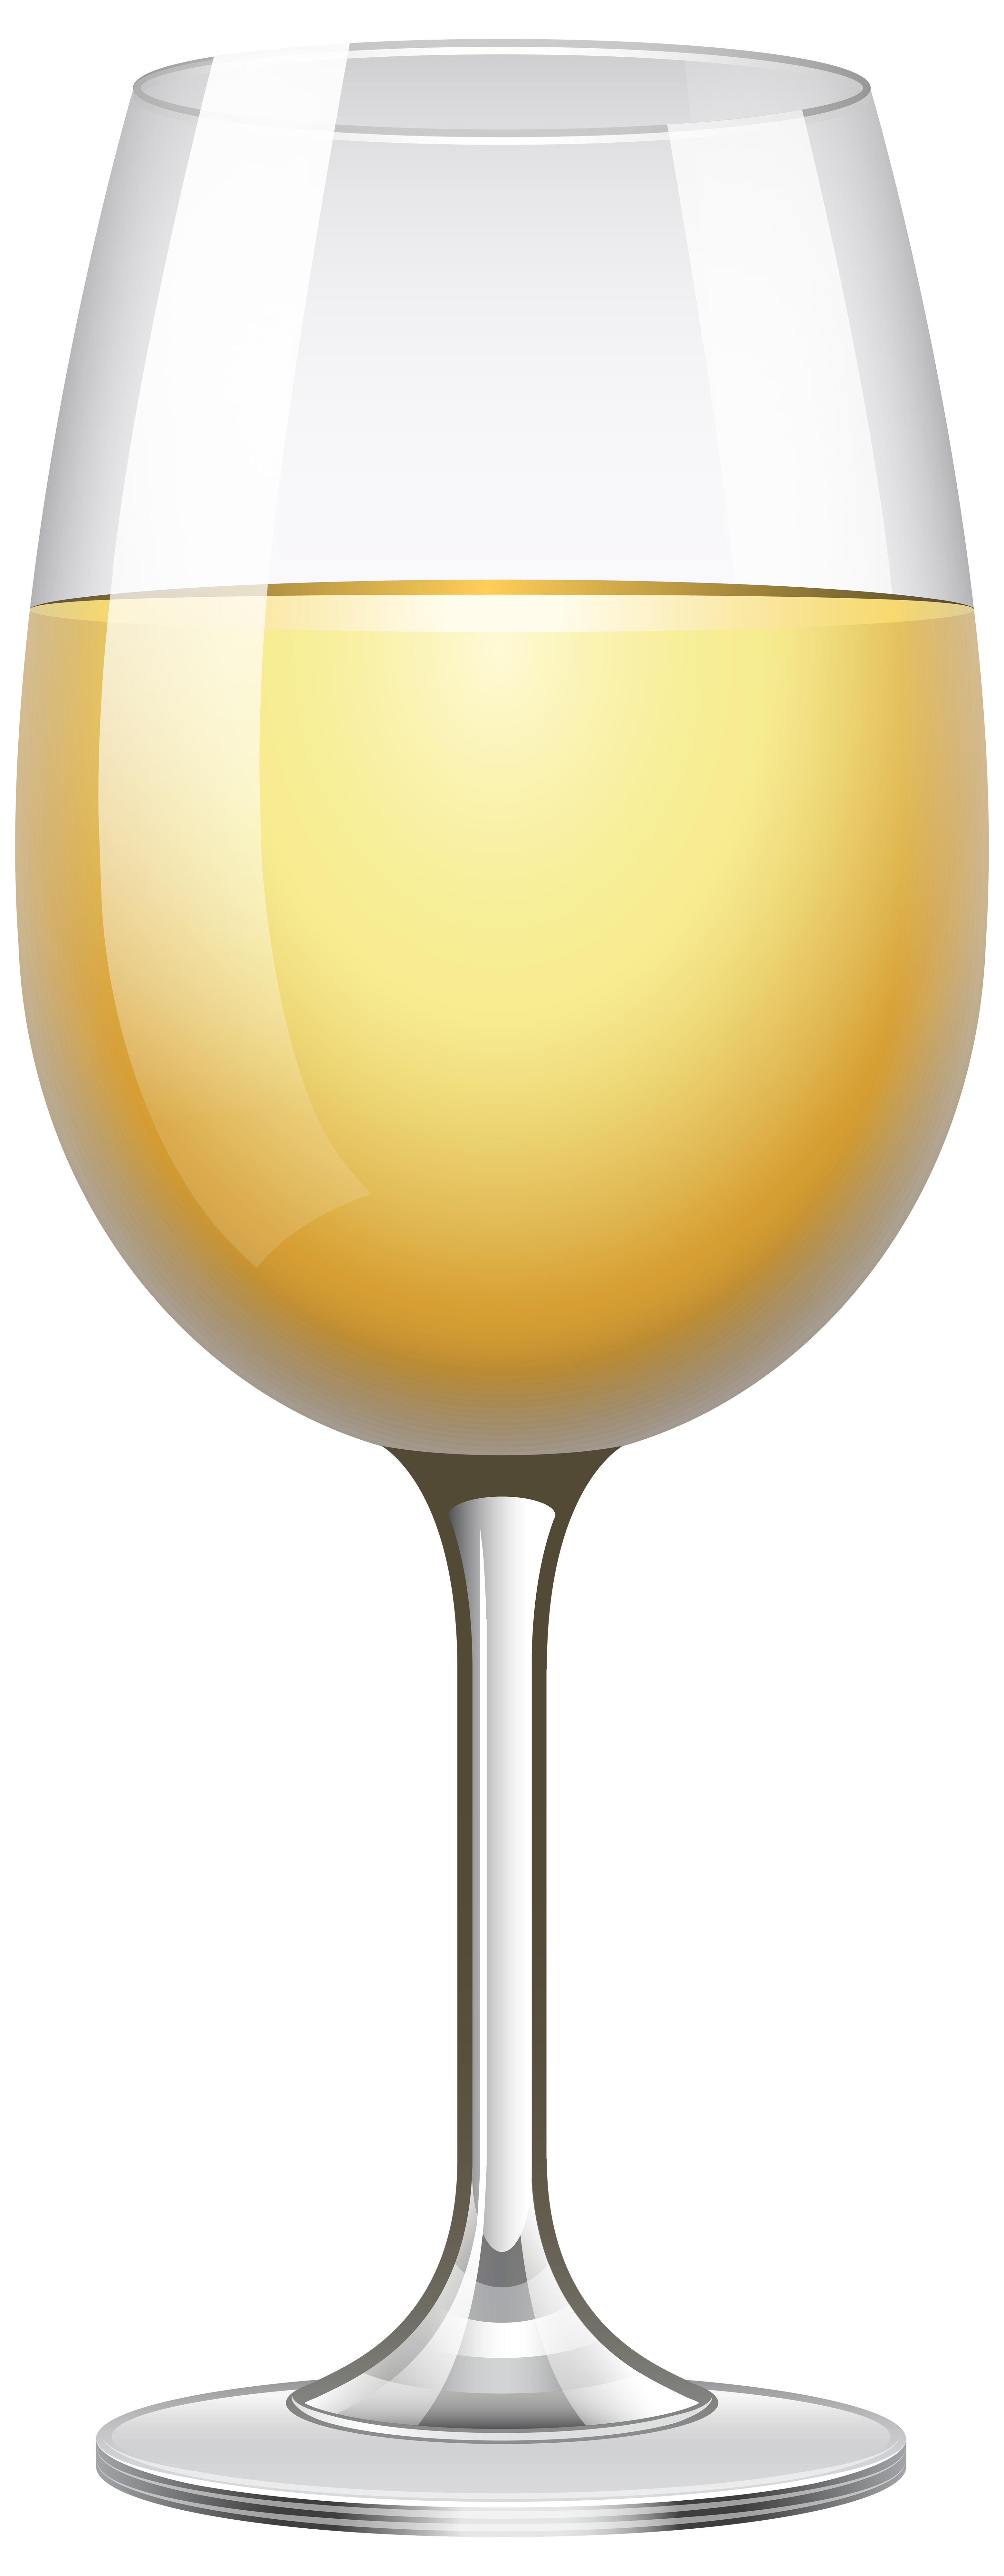 clipart glass of wine - photo #28